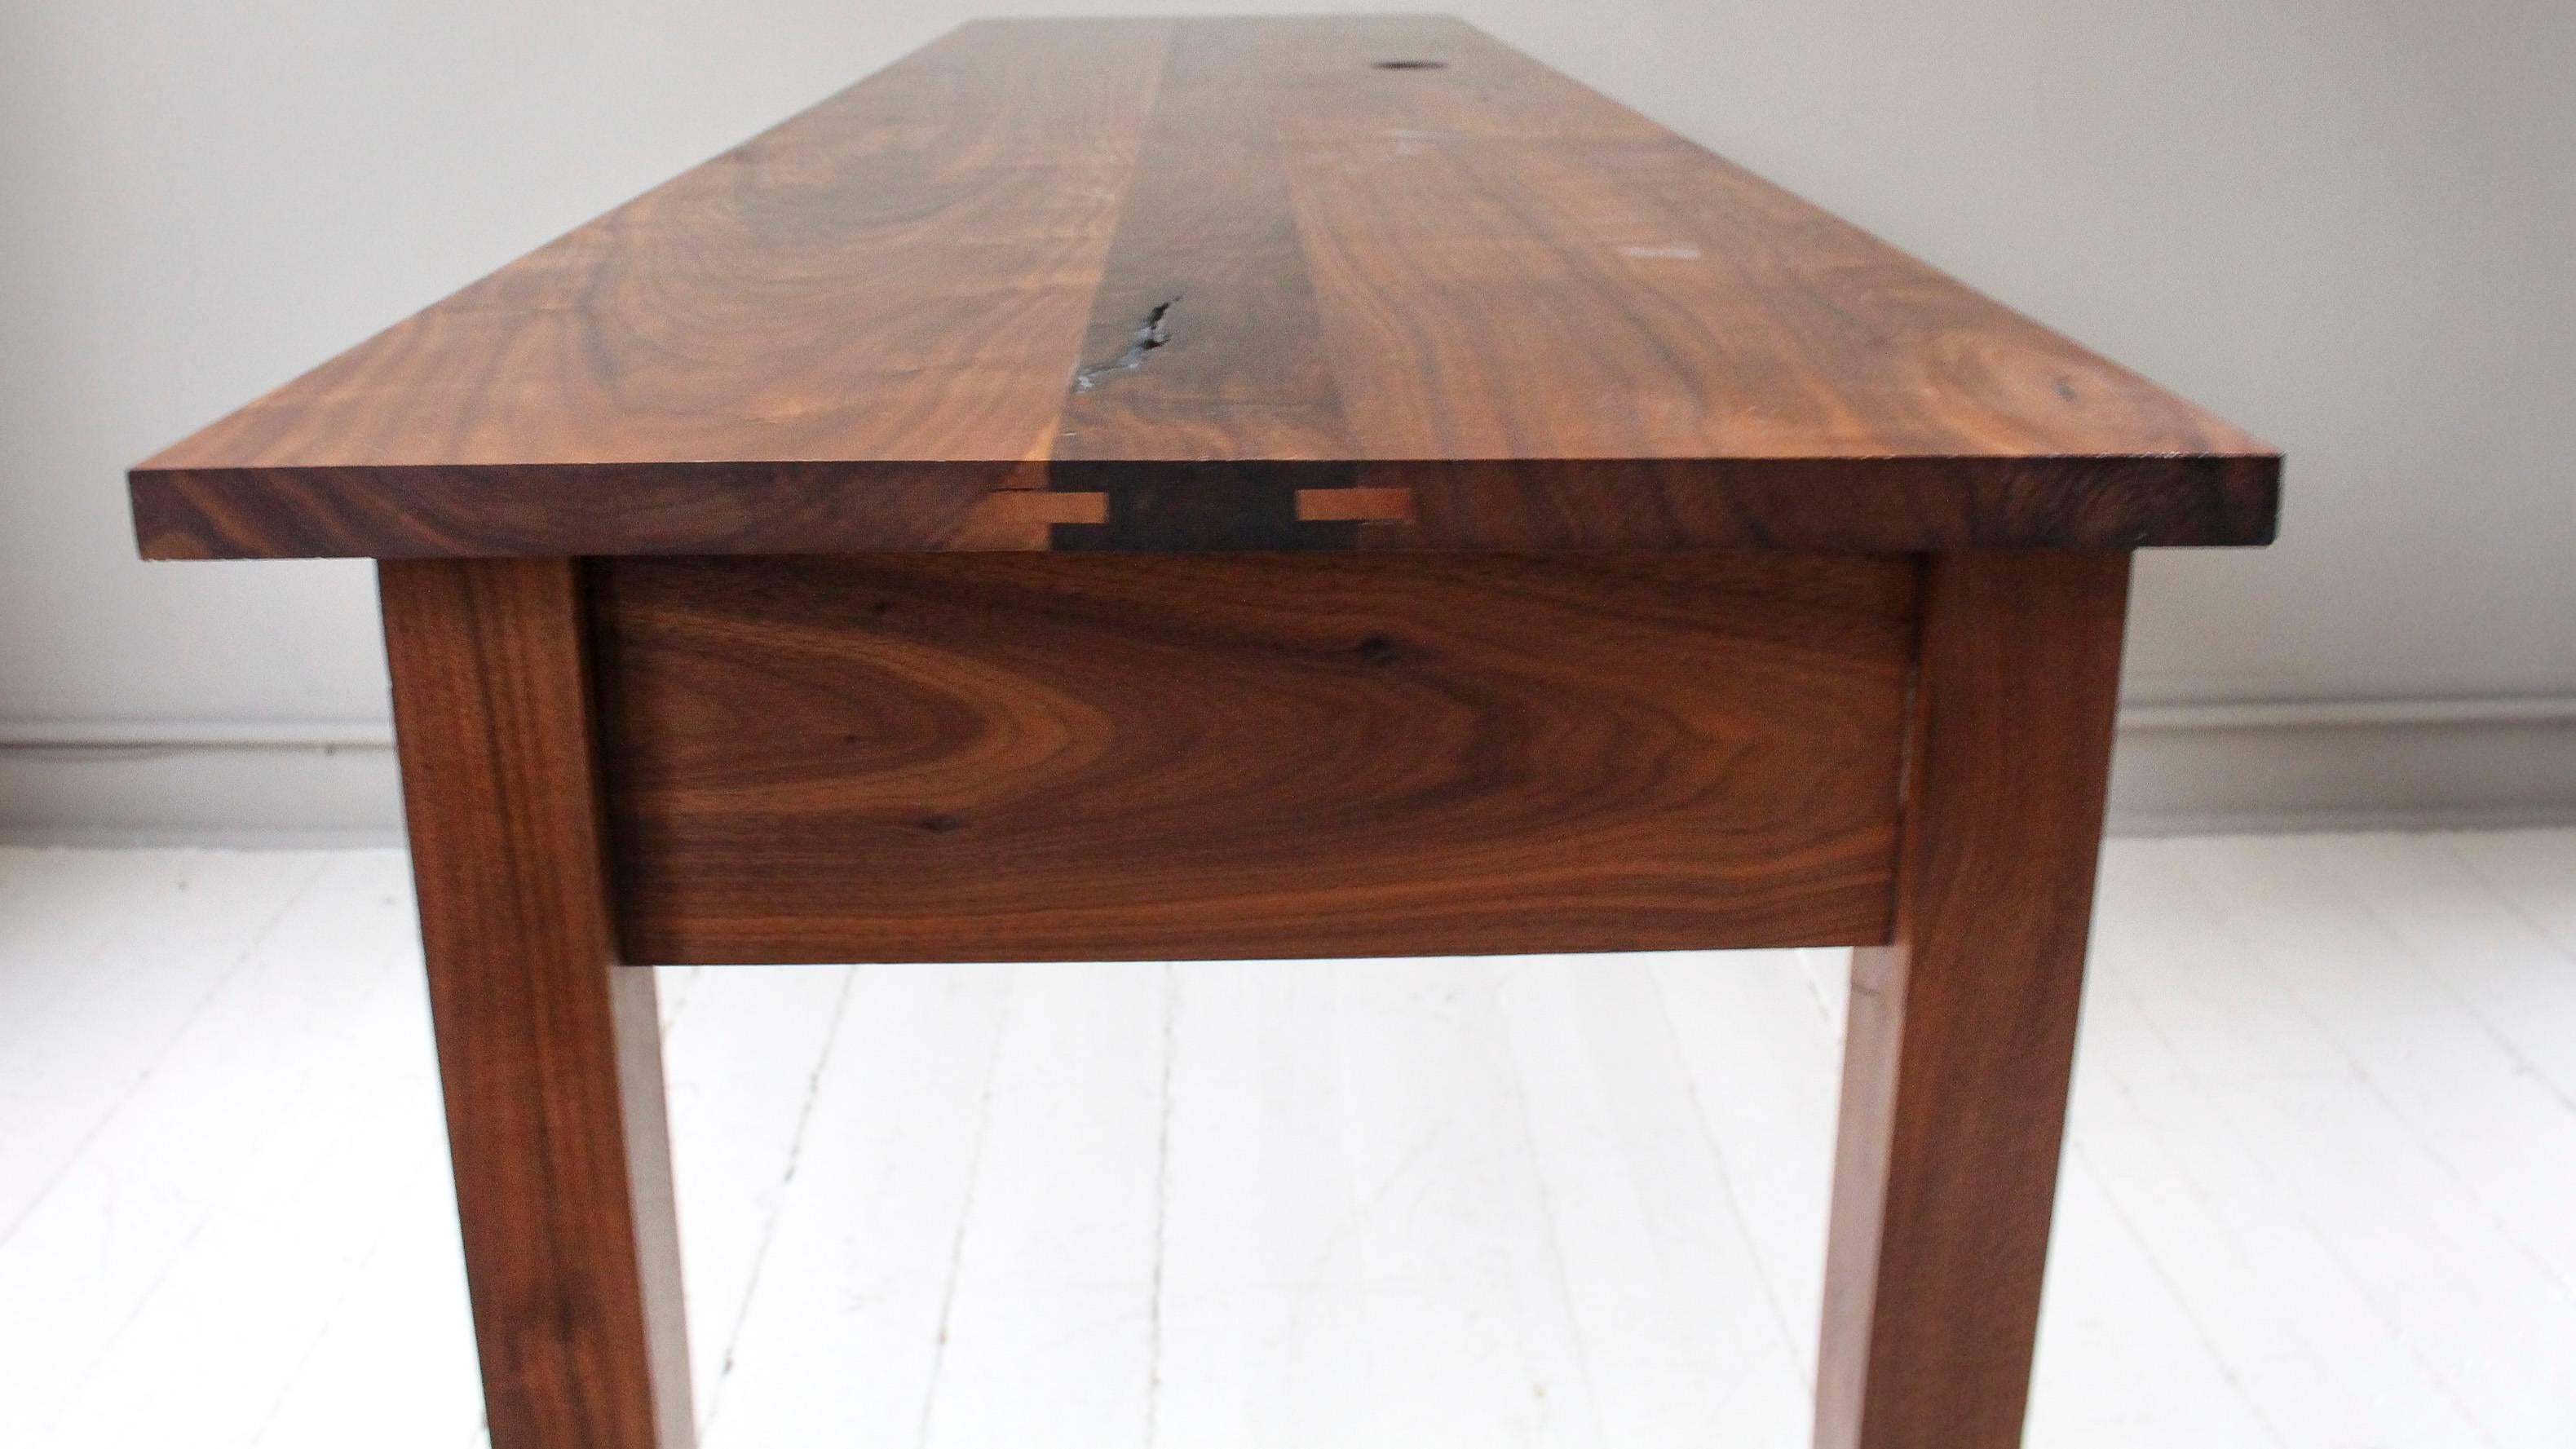 Handmade One-of-a-Kind Walnut Console Table, 21st century American, with custom finish. Table, which is constructed with nary a nail nor dab of glue, has a missing loose knot on the surface that adds to its artisan charm. Raised on tapering legs,